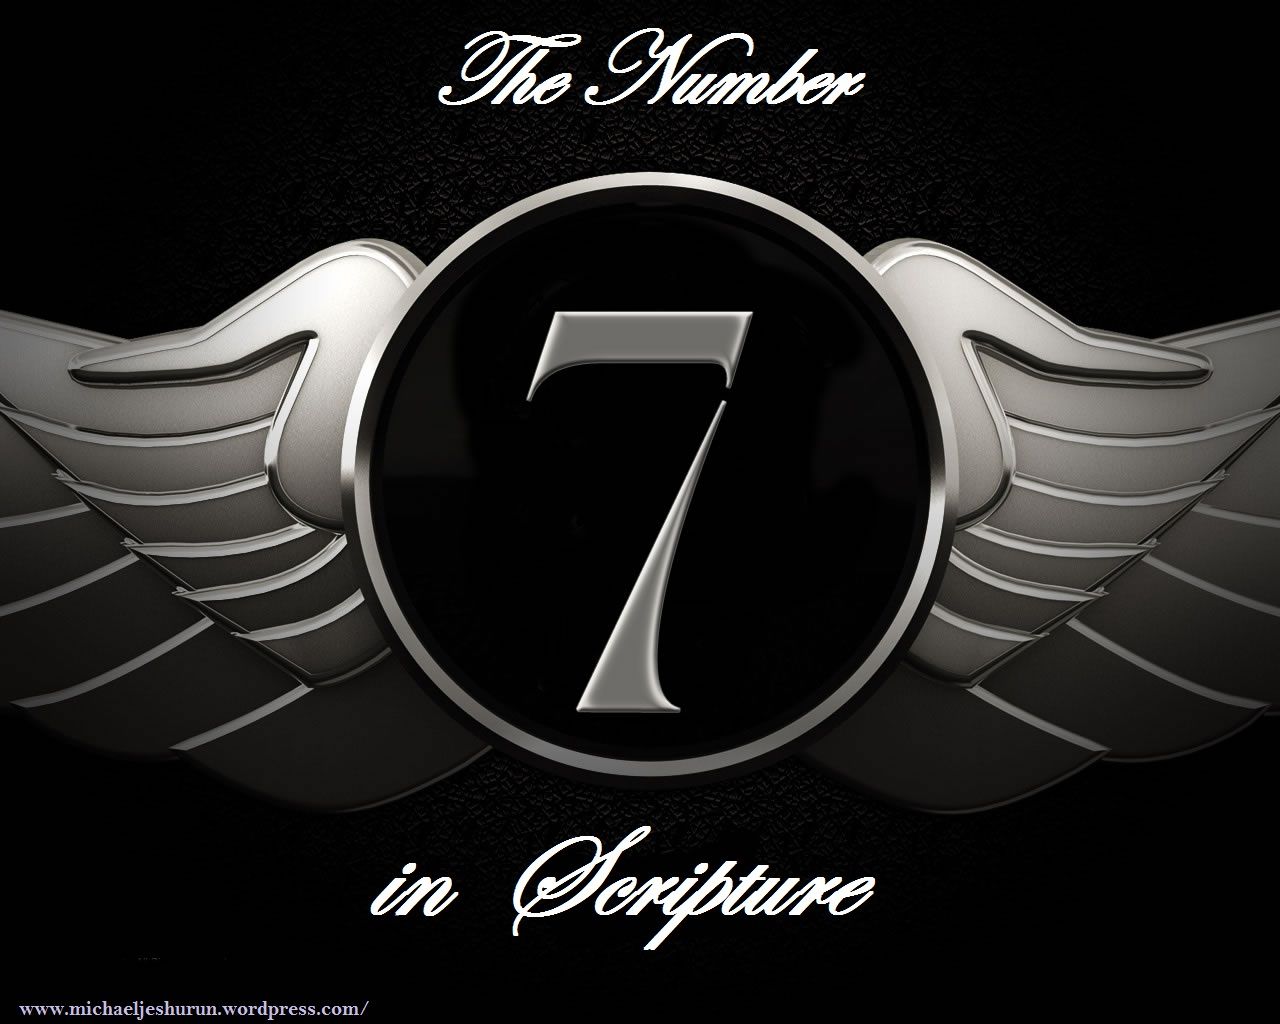 Perfection: God's Math. Numerology, Numbers, Seventh